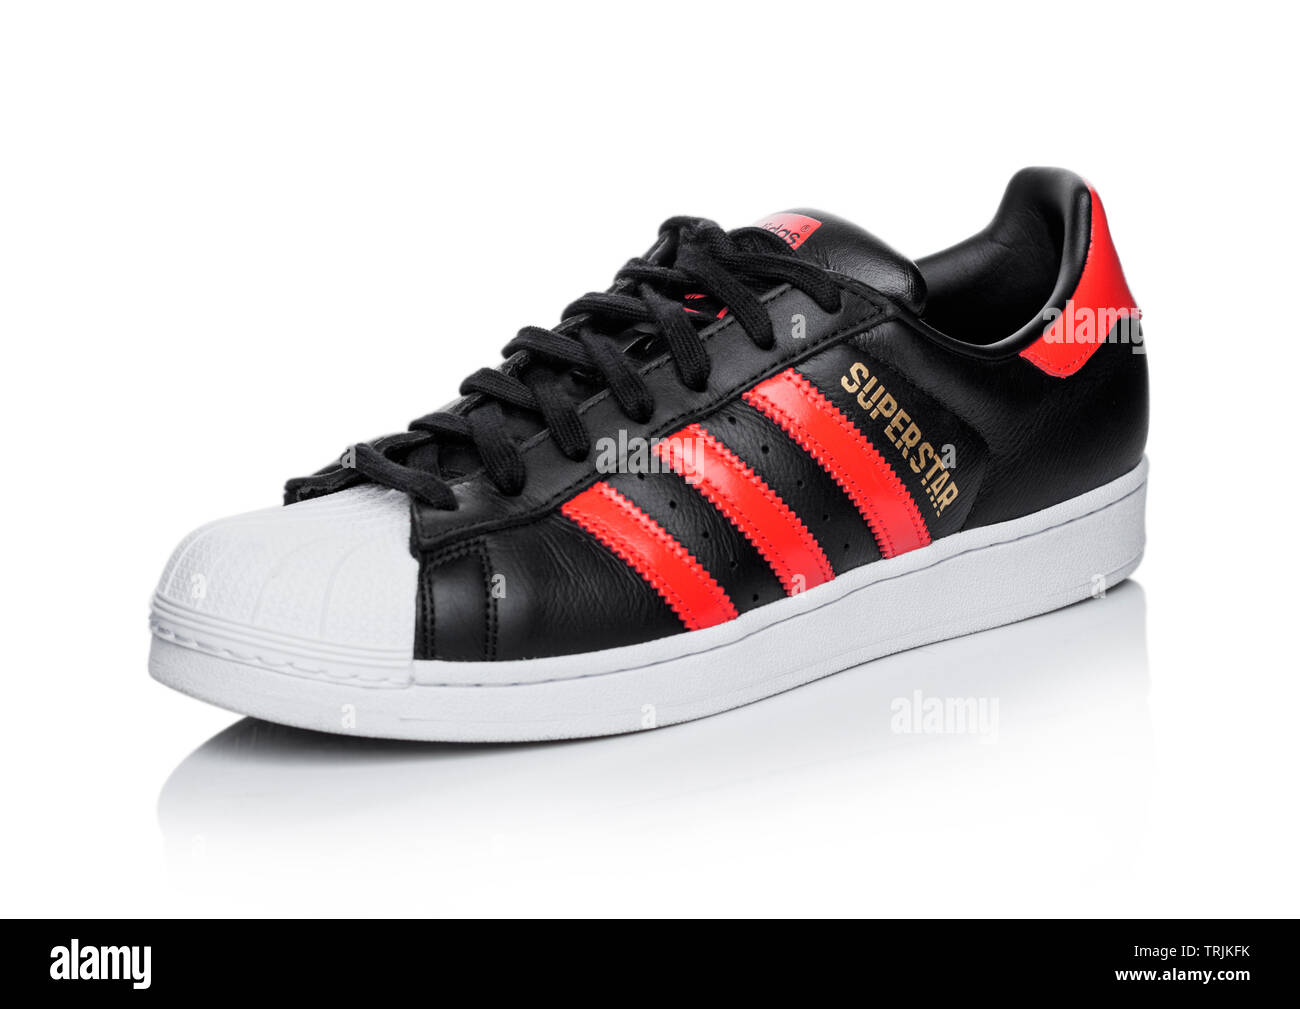 Dardos Humedal recepción LONDON, UK - JUNE 05, 2019: Adidas Originals Superstar black shoe with red  stripes on white background Stock Photo - Alamy